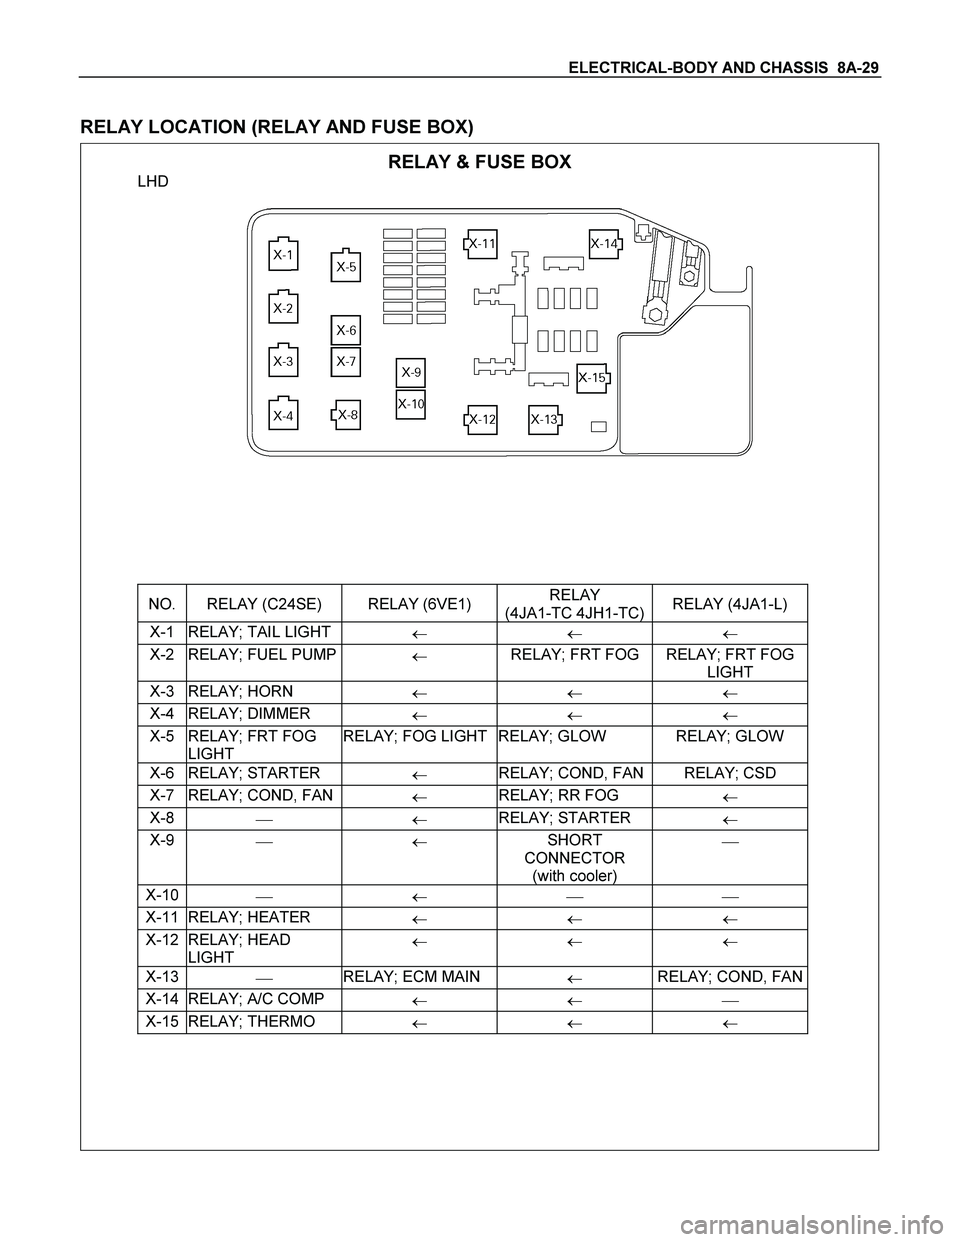 ISUZU TF SERIES 2004  Workshop Manual ELECTRICAL-BODY AND CHASSIS  8A-29 
 
RELAY LOCATION (RELAY AND FUSE BOX) 
 RELAY & FUSE BOX 
LHD 
 
 
 
 
 
 
 
 
 
 
 
 
 
 
 
 
 
 
 
 
 
NO.  RELAY (C24SE)  RELAY (6VE1) RELAY  
(4JA1-TC 4JH1-TC)R